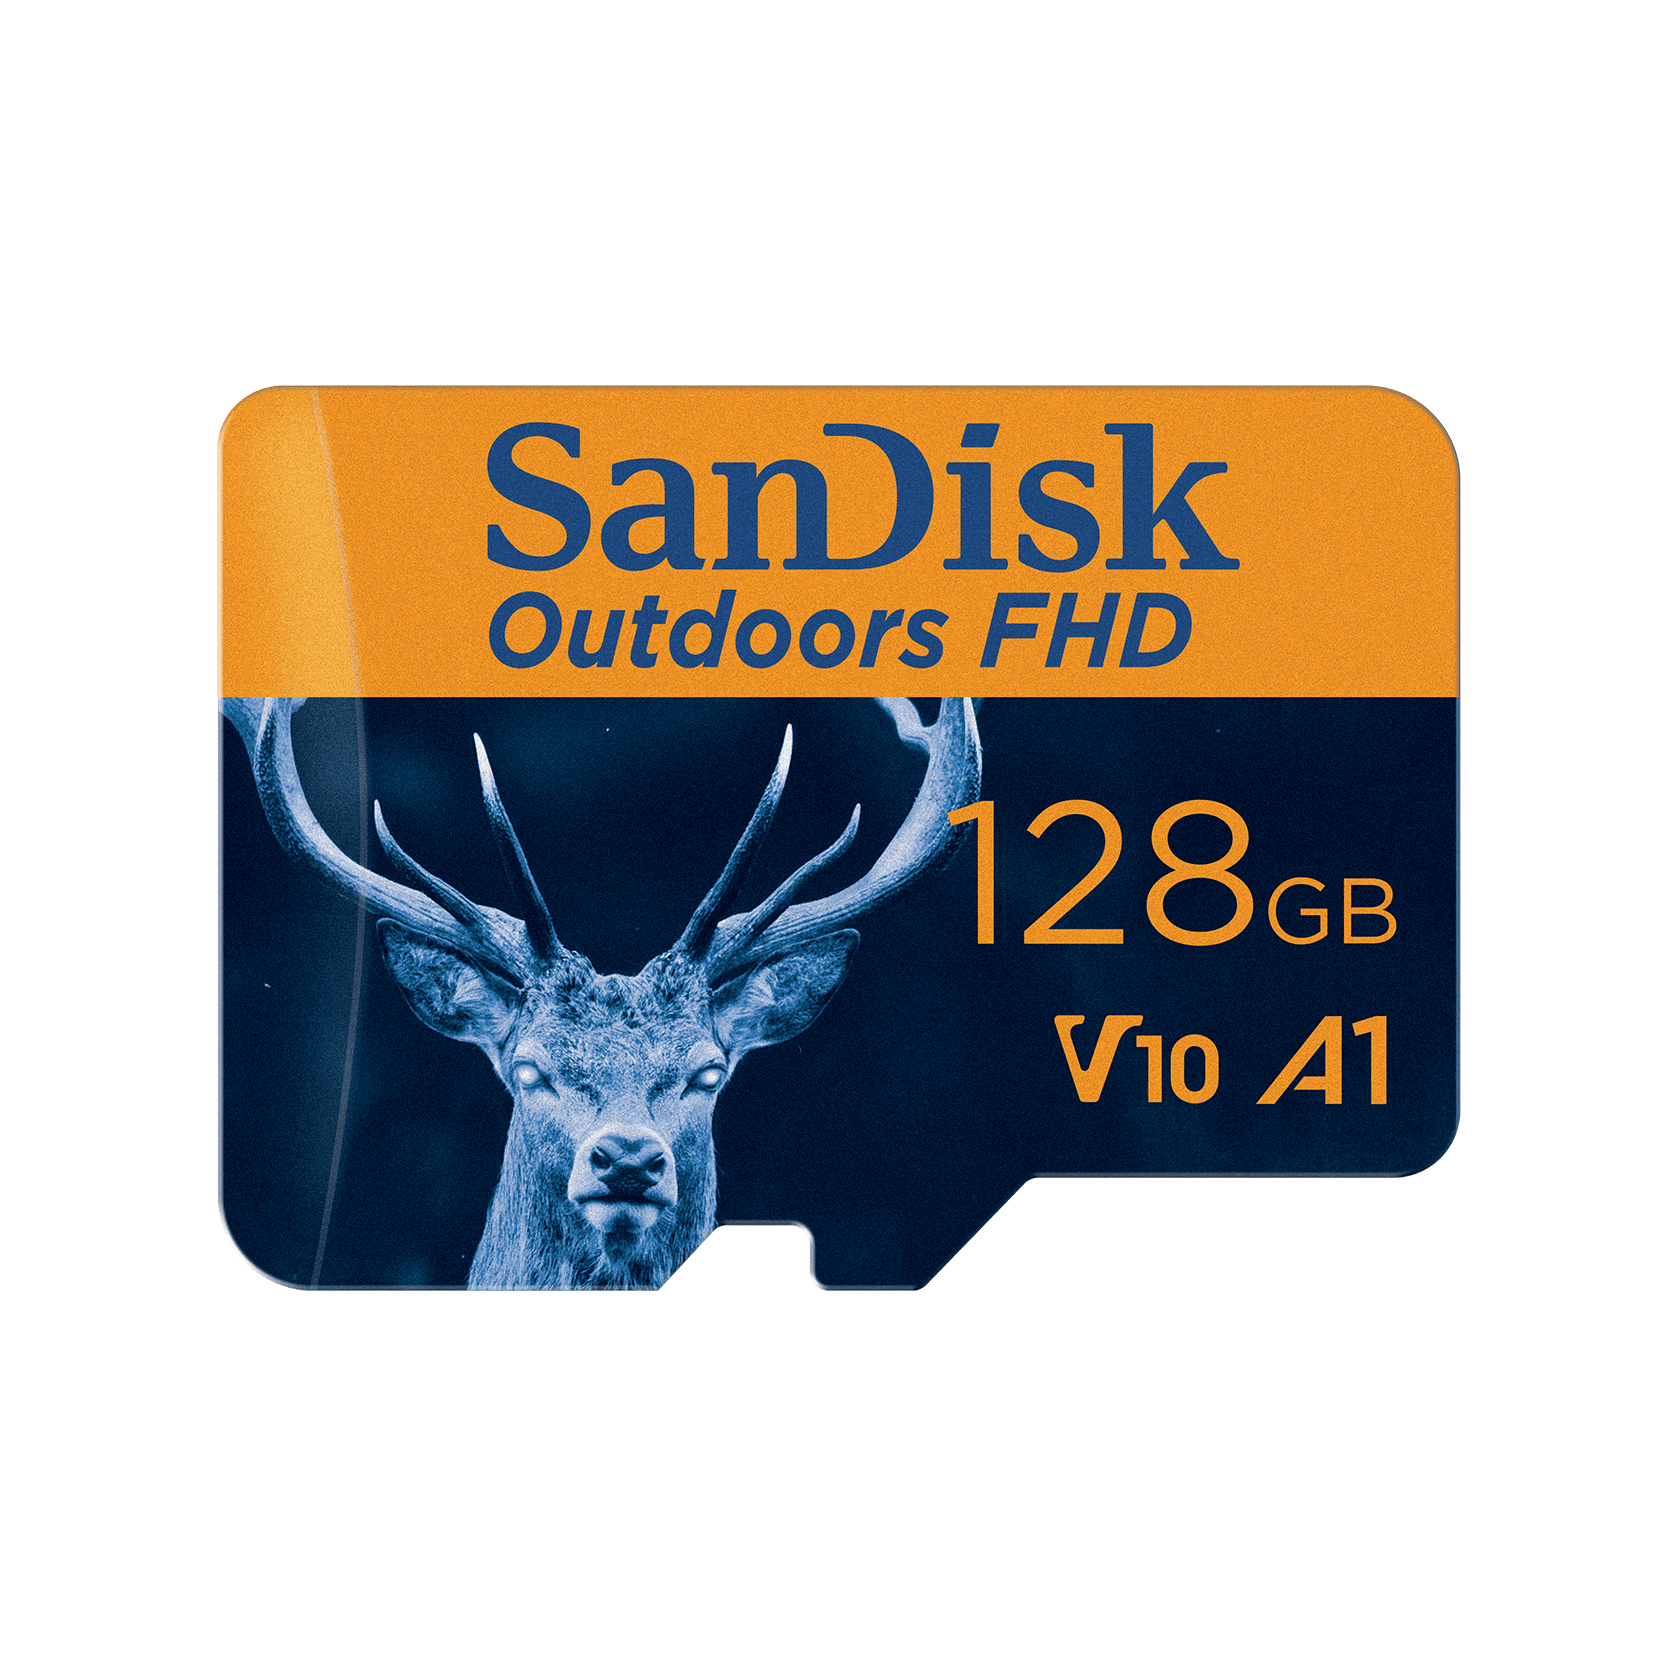 SanDisk Outdoors FHD MicroSDXC UHS-I Memory Card With SD Adapter - 128GB 2-Pack - SDSQUBC-128G-GN6VT